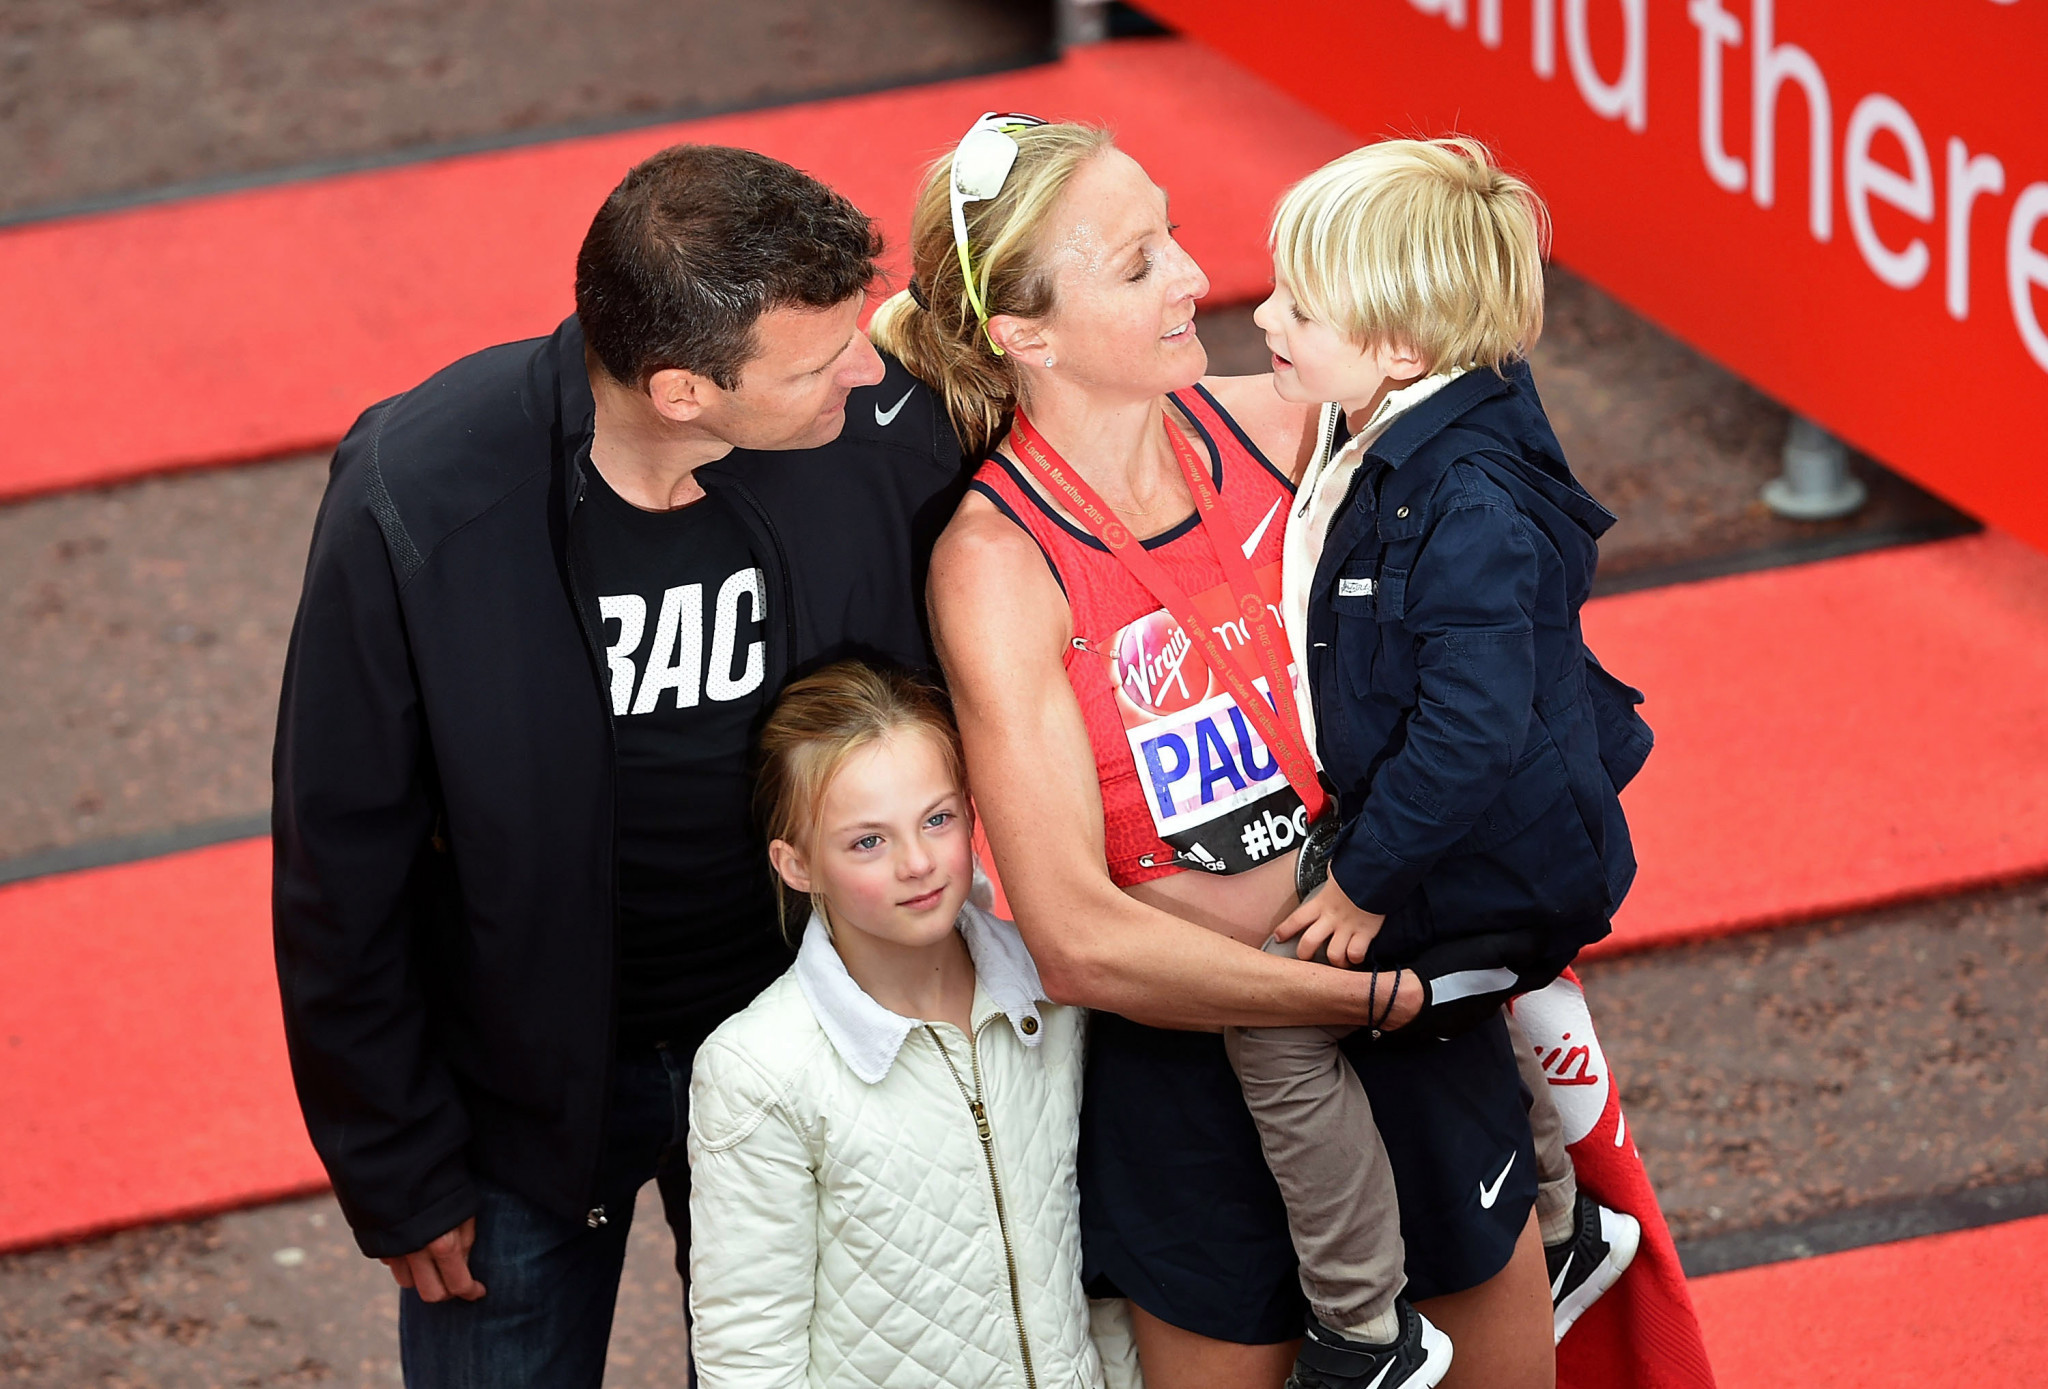 Gary Lough, left, with wife Paula Radcliffe and their two children after the 2015 London Marathon ©Getty Images